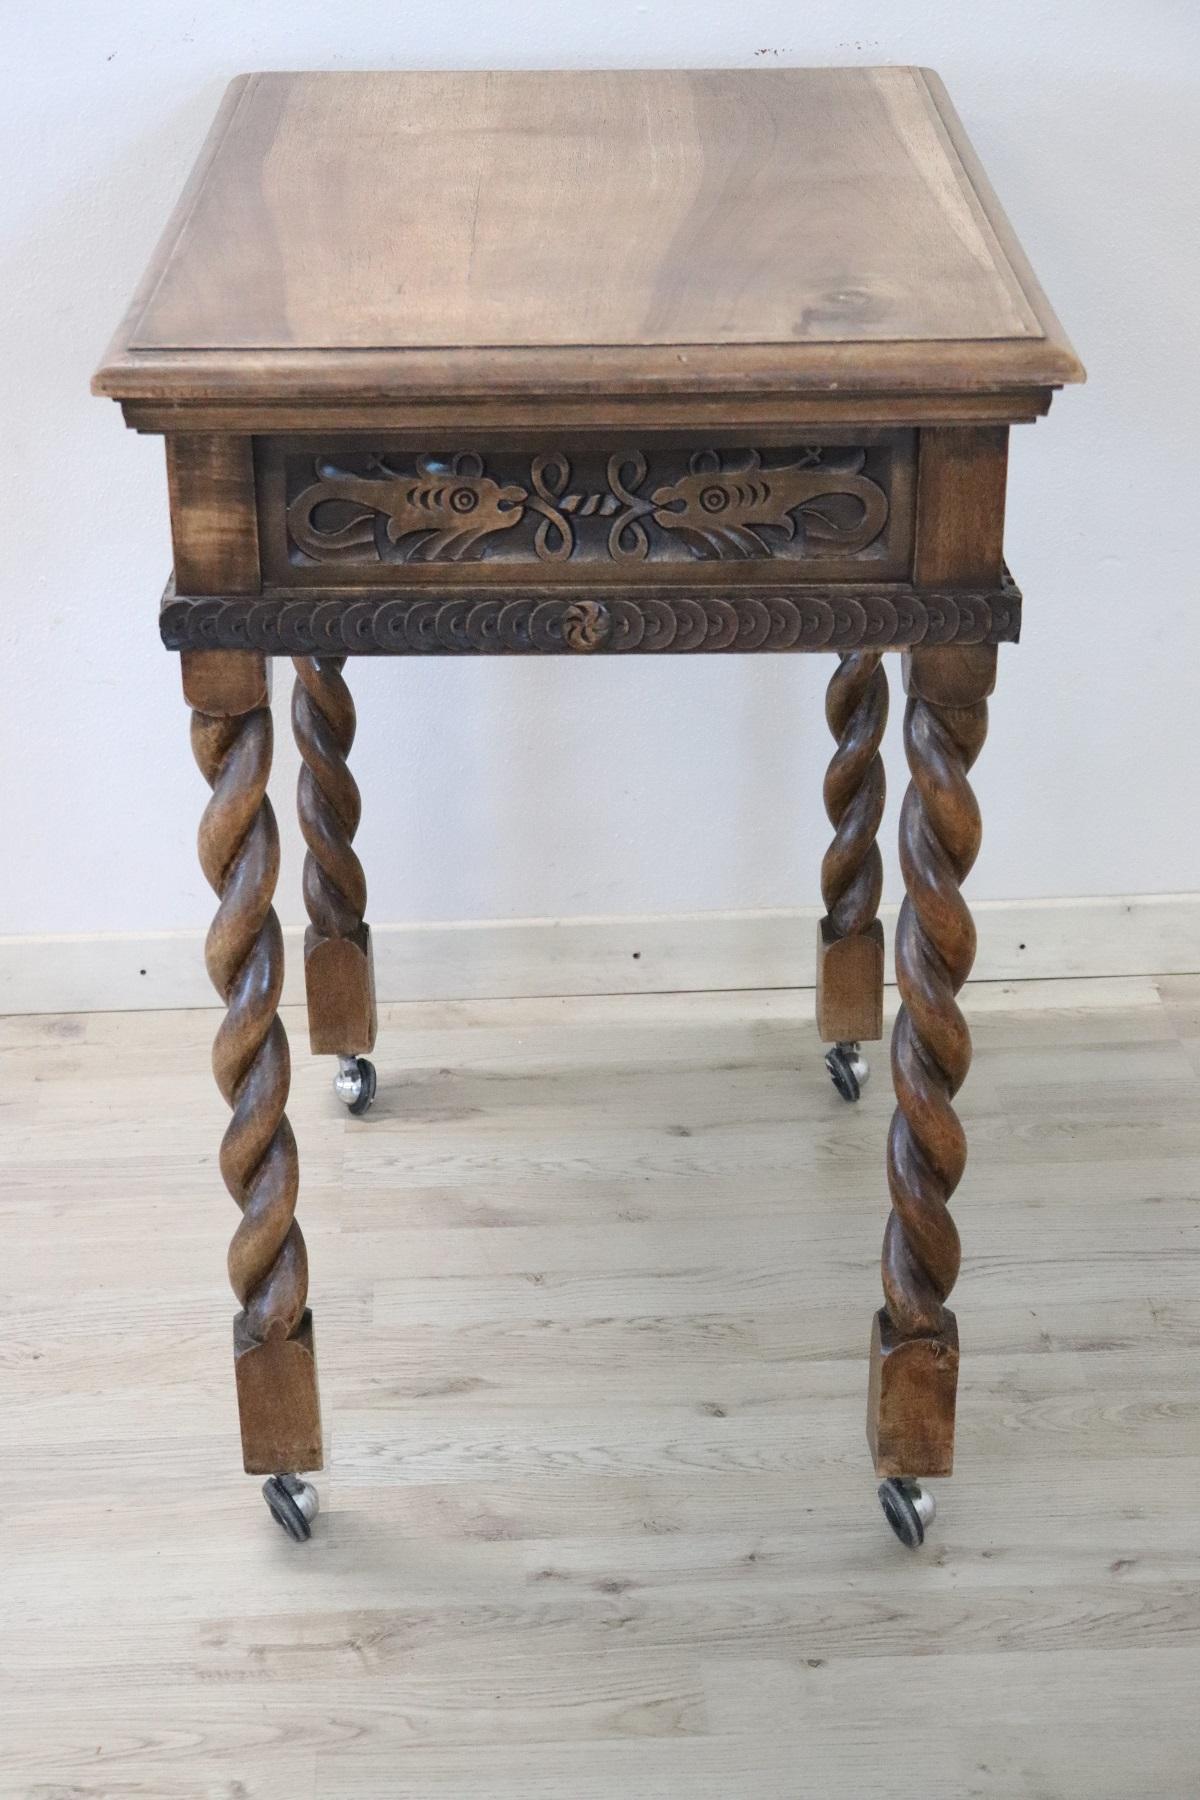 Late 19th Century 19th Century Italian Renaissance Style Carved Walnut Side Table or Desk